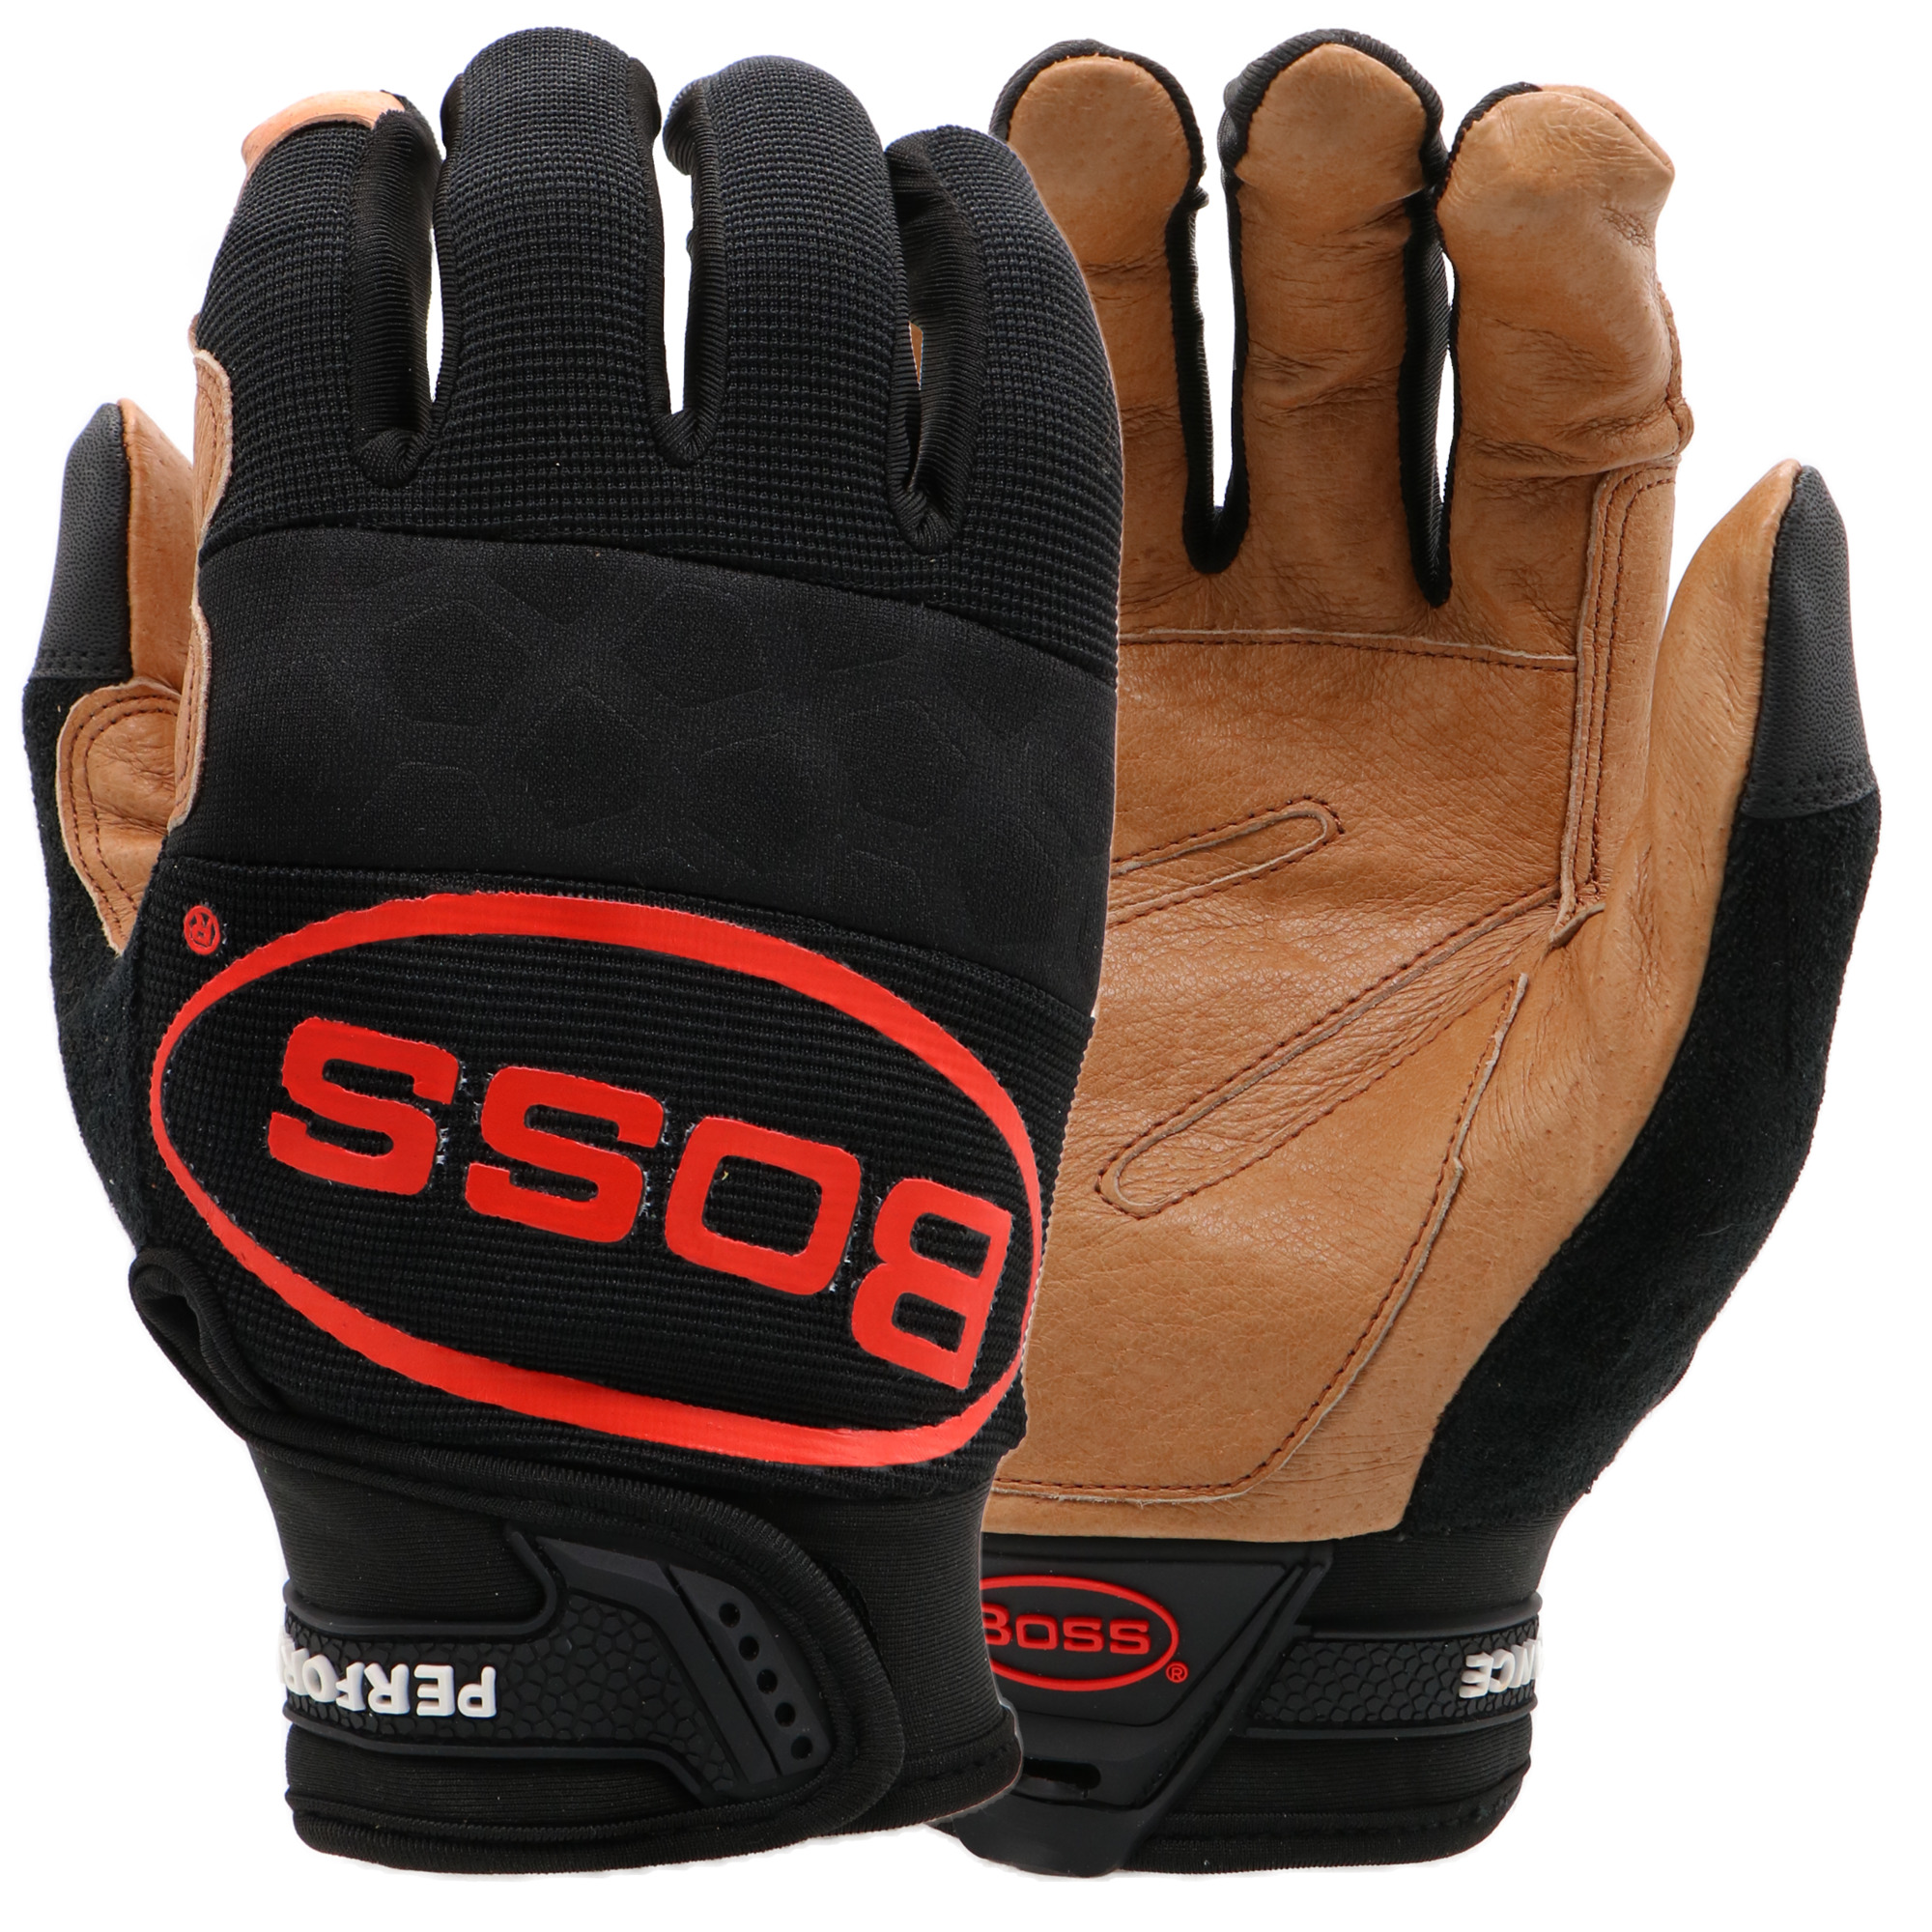 Boss, Hi- Performance Glove with Grain Cowhide Palm, Size L, Color Black, Included (qty.) 1 Model B51111-L